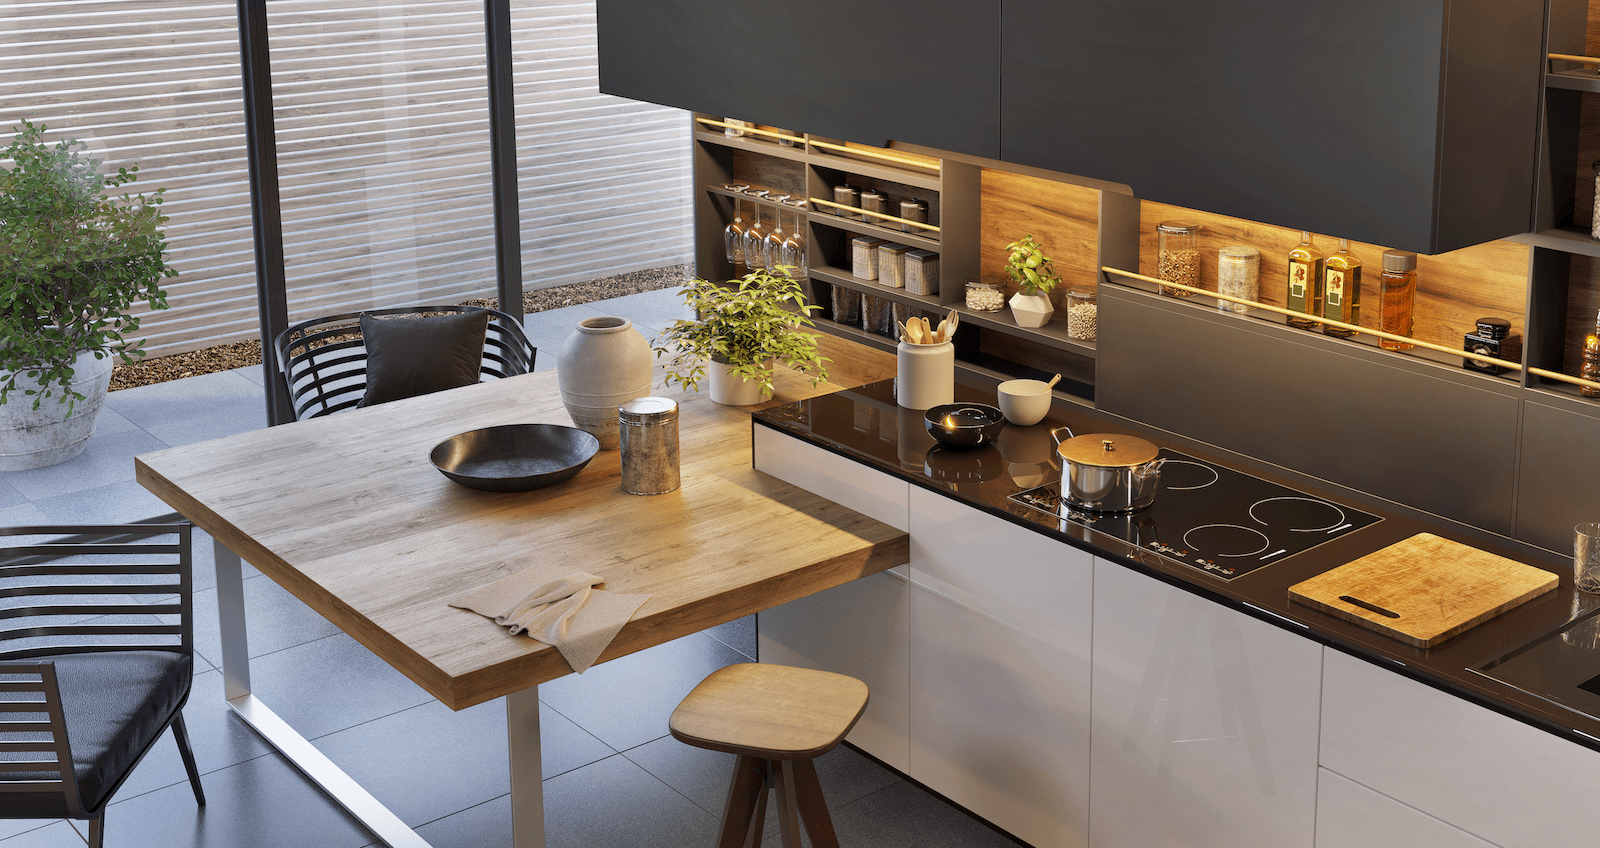 Eat-in kitchen design saves space